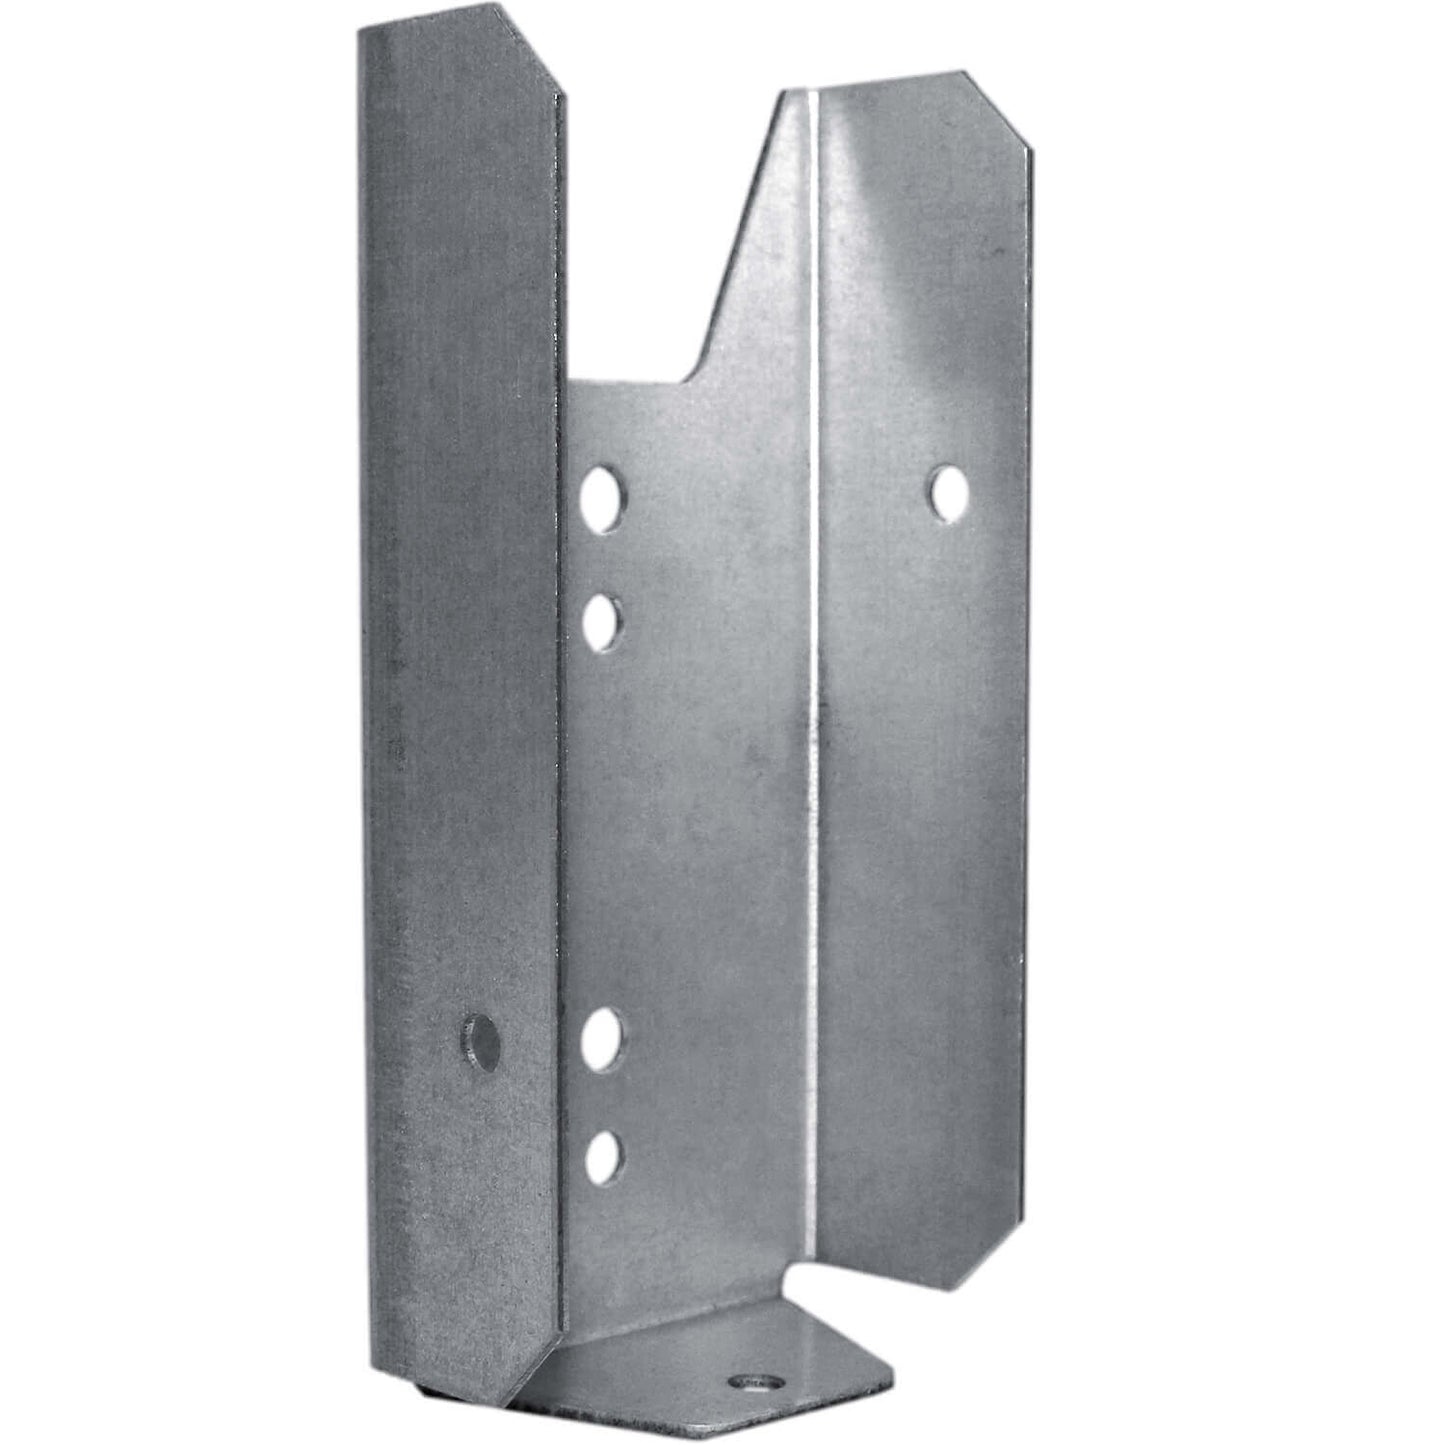 Wood Fence Rail Bracket For 2x4 Dimensional Lumber. Galvanized Steel to Resist Rusting. Quantity Each